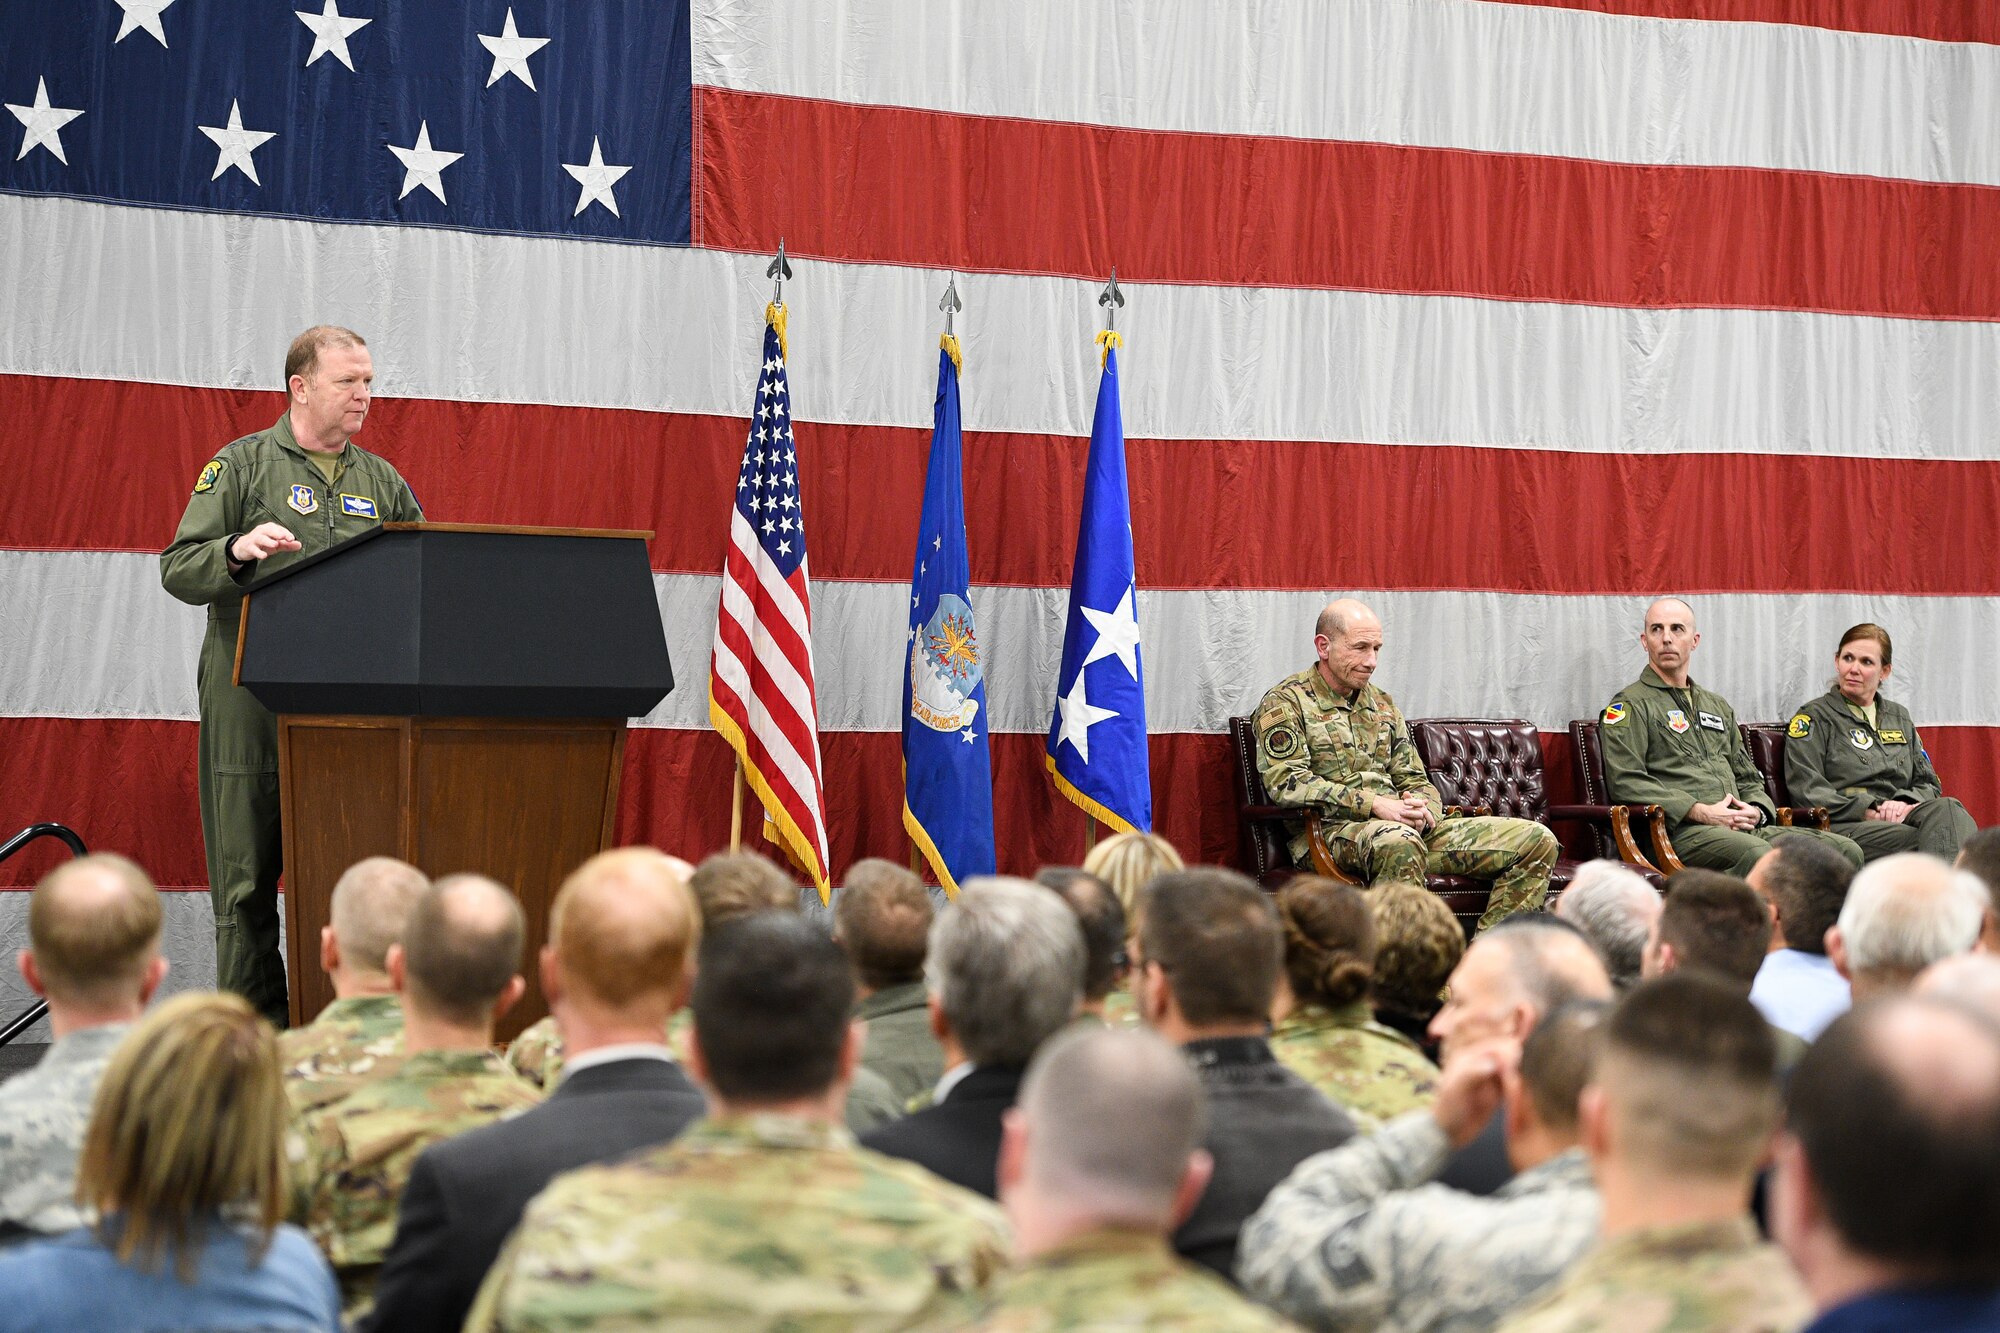 Lt. Gen. Richard W. Scobee, Air Force Reserve Command commander and chief of Air Force Reserve, speaks at a Full Warfighting Capability Ceremony at Hill Air Force Base